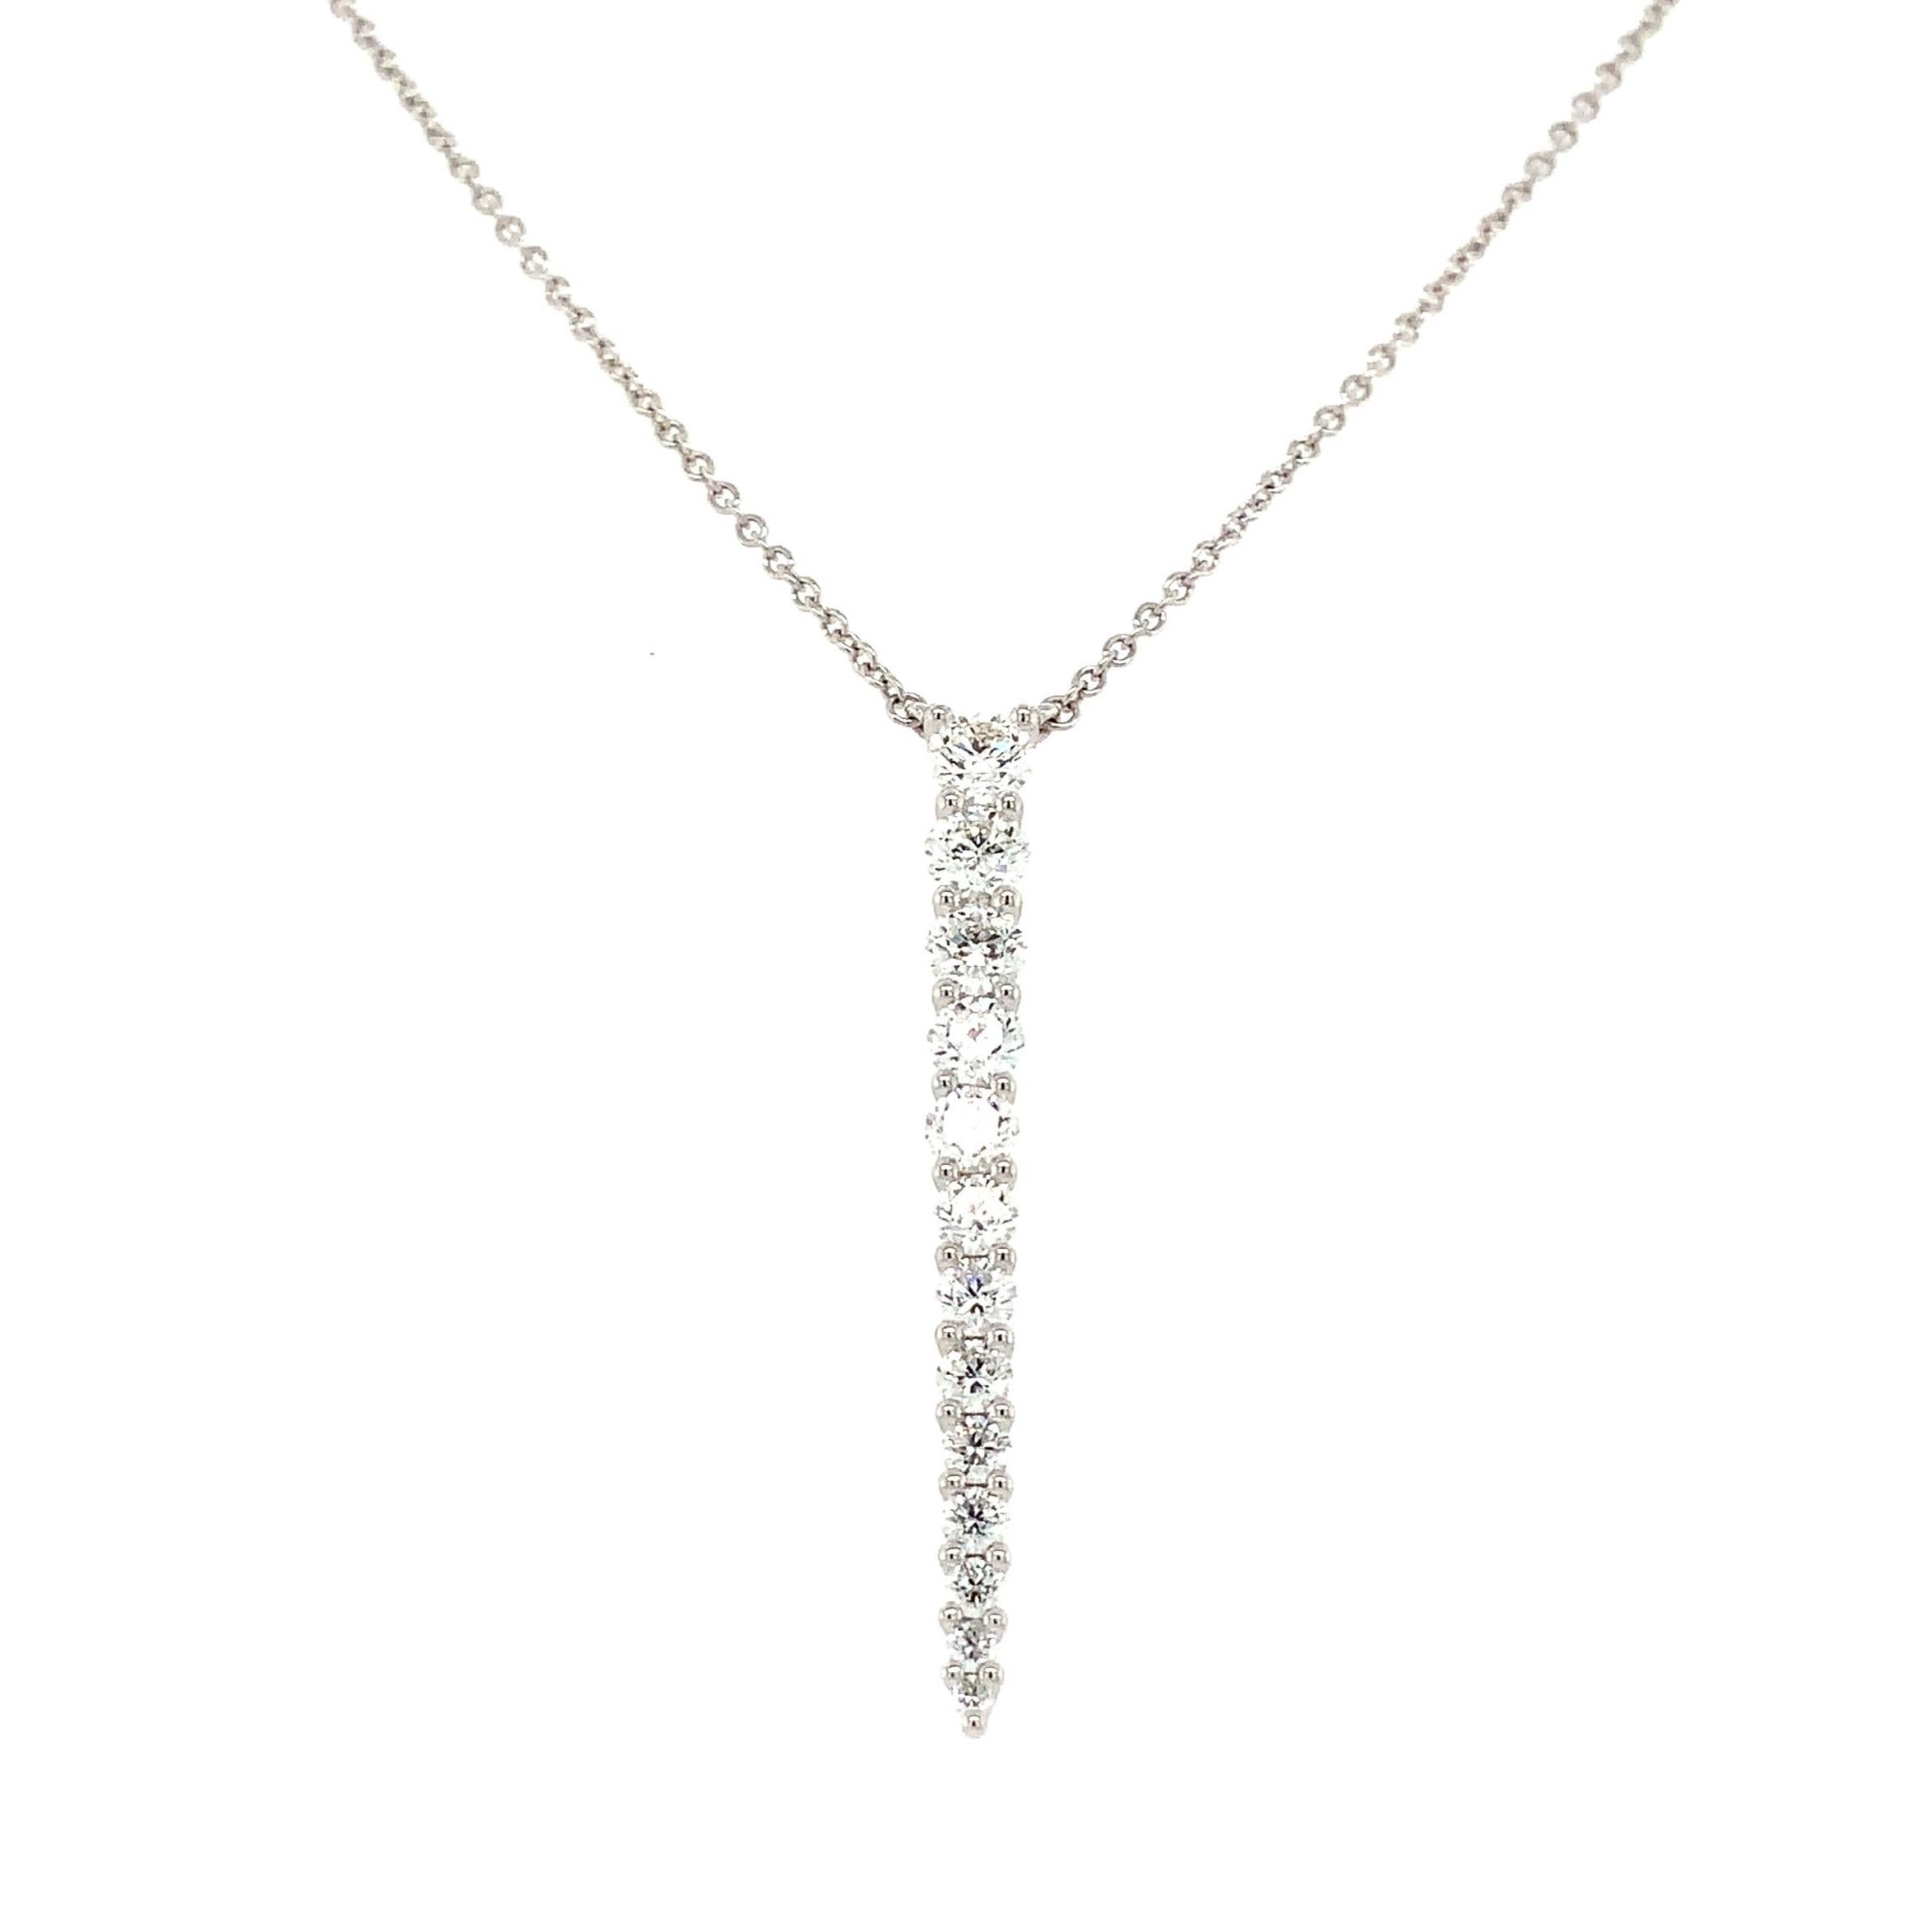 This elegant Diamond Pendant from the Memoire Identity Collection, set in 18K White Gold, features 12 Round Brilliant Cut Diamonds, graded F-G in Color and VS in Clarity, totaling 1.20 ct. of weight. Its professional craftsmanship is evidenced by